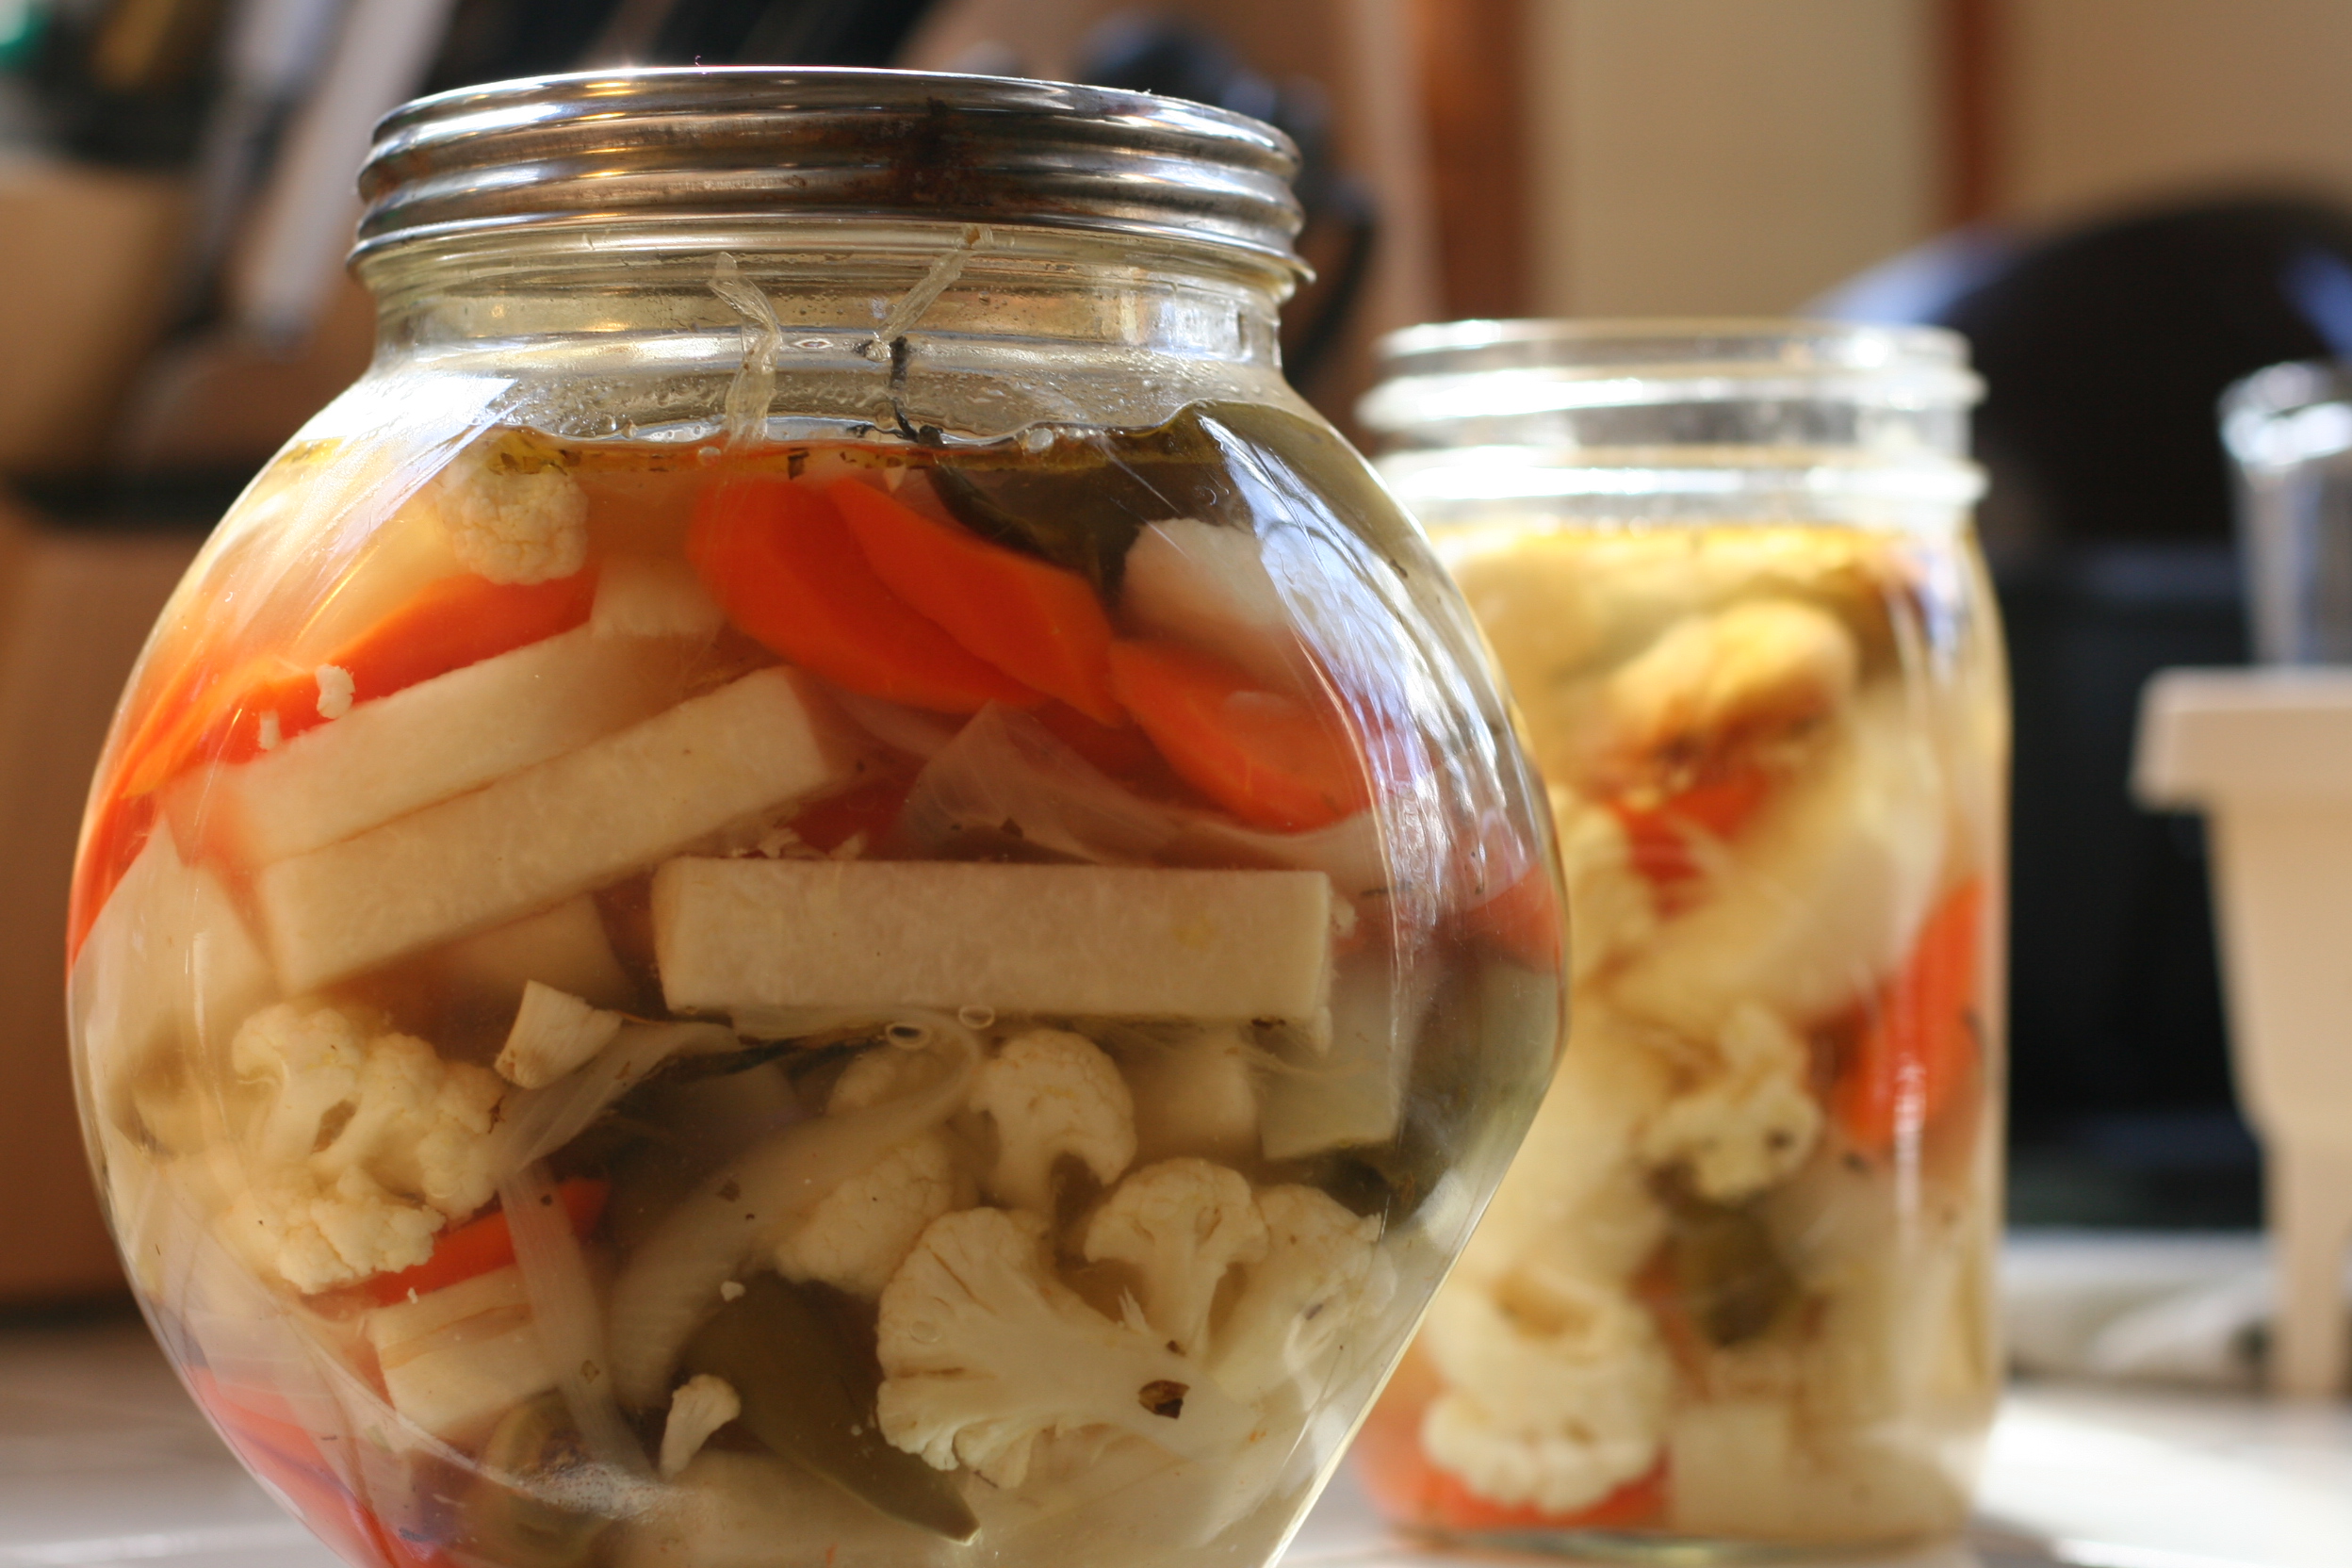 Preserving vegetables is low time preference.